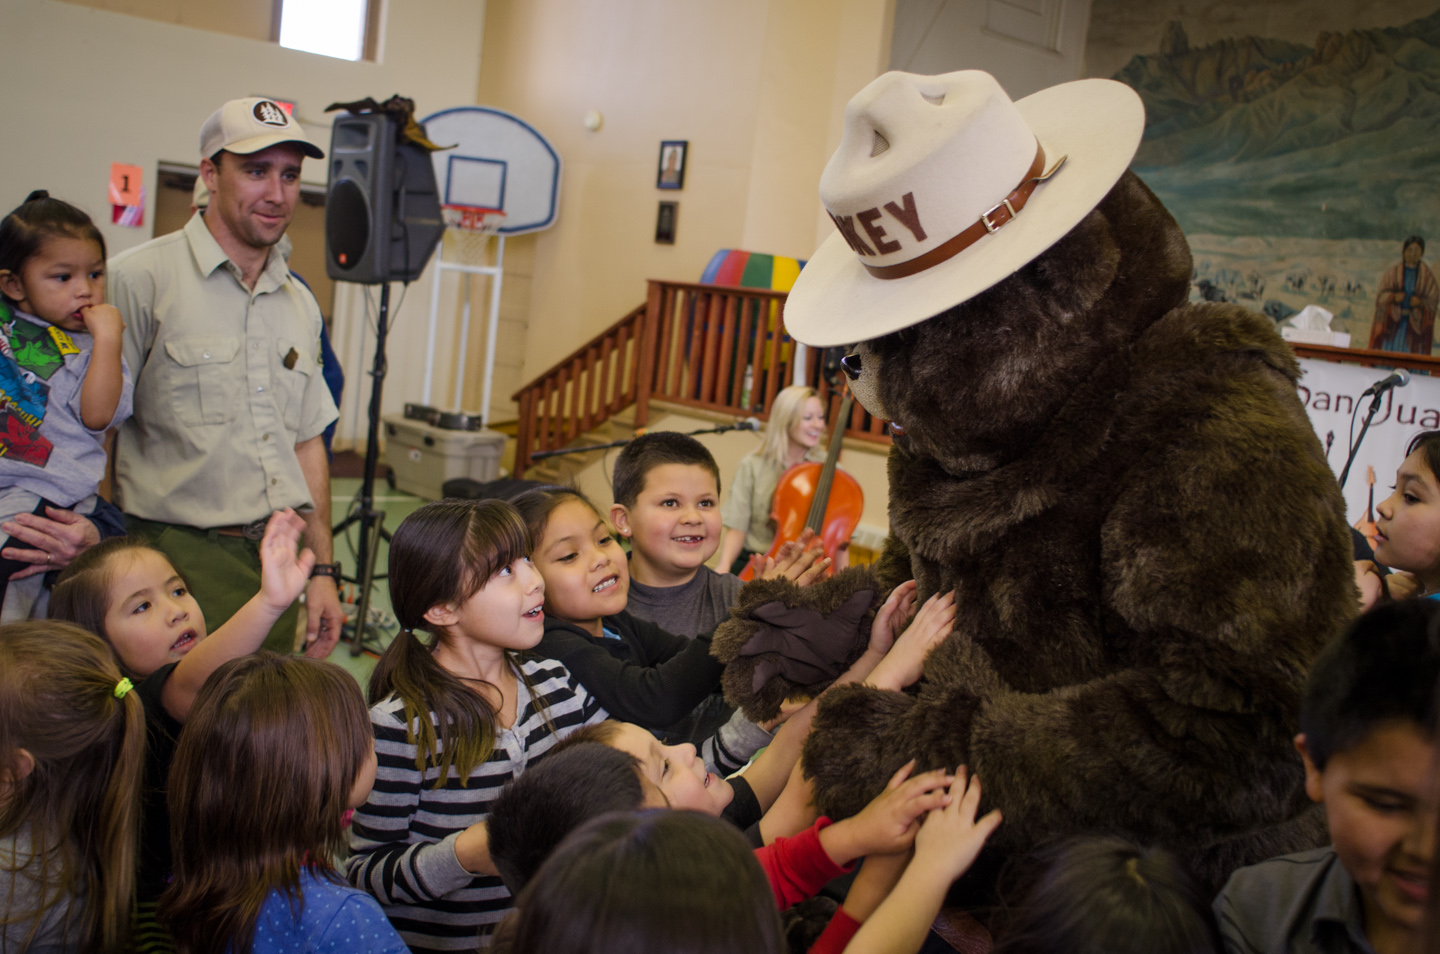 Once the presentation came to a close, children were encouraged to get a little on-on-one time with the icon of wildfire prevention, Smokey Bear